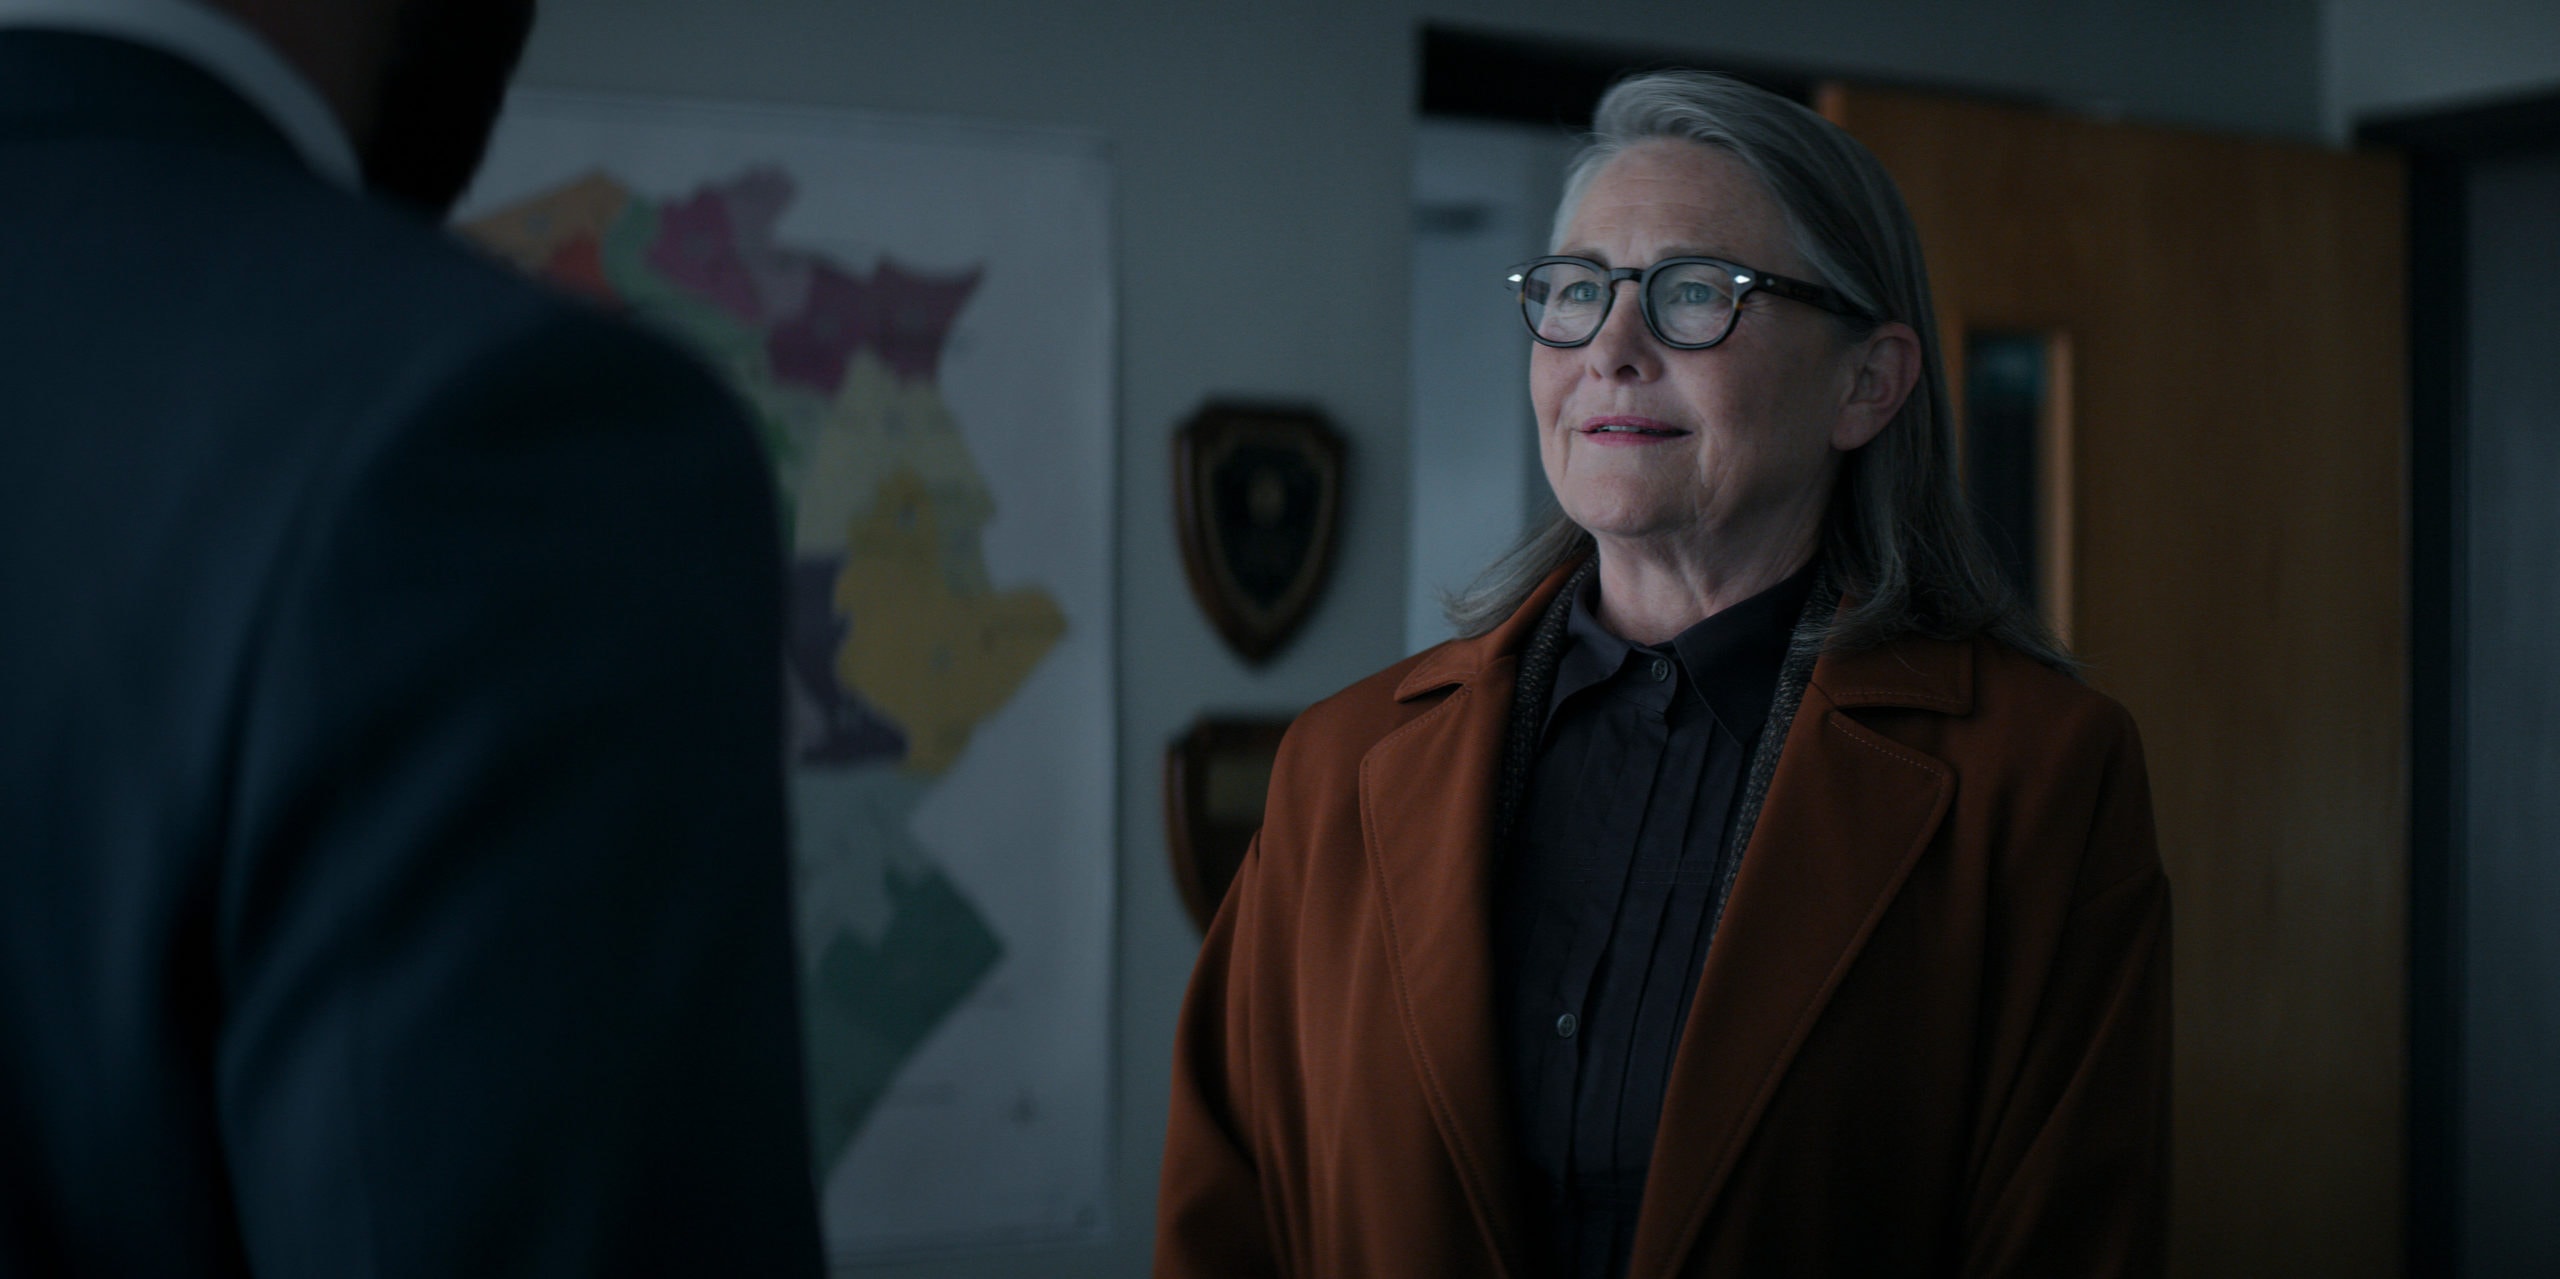 Defending Jacob review: Cherry Jones does typically brilliant work as a sly attorney